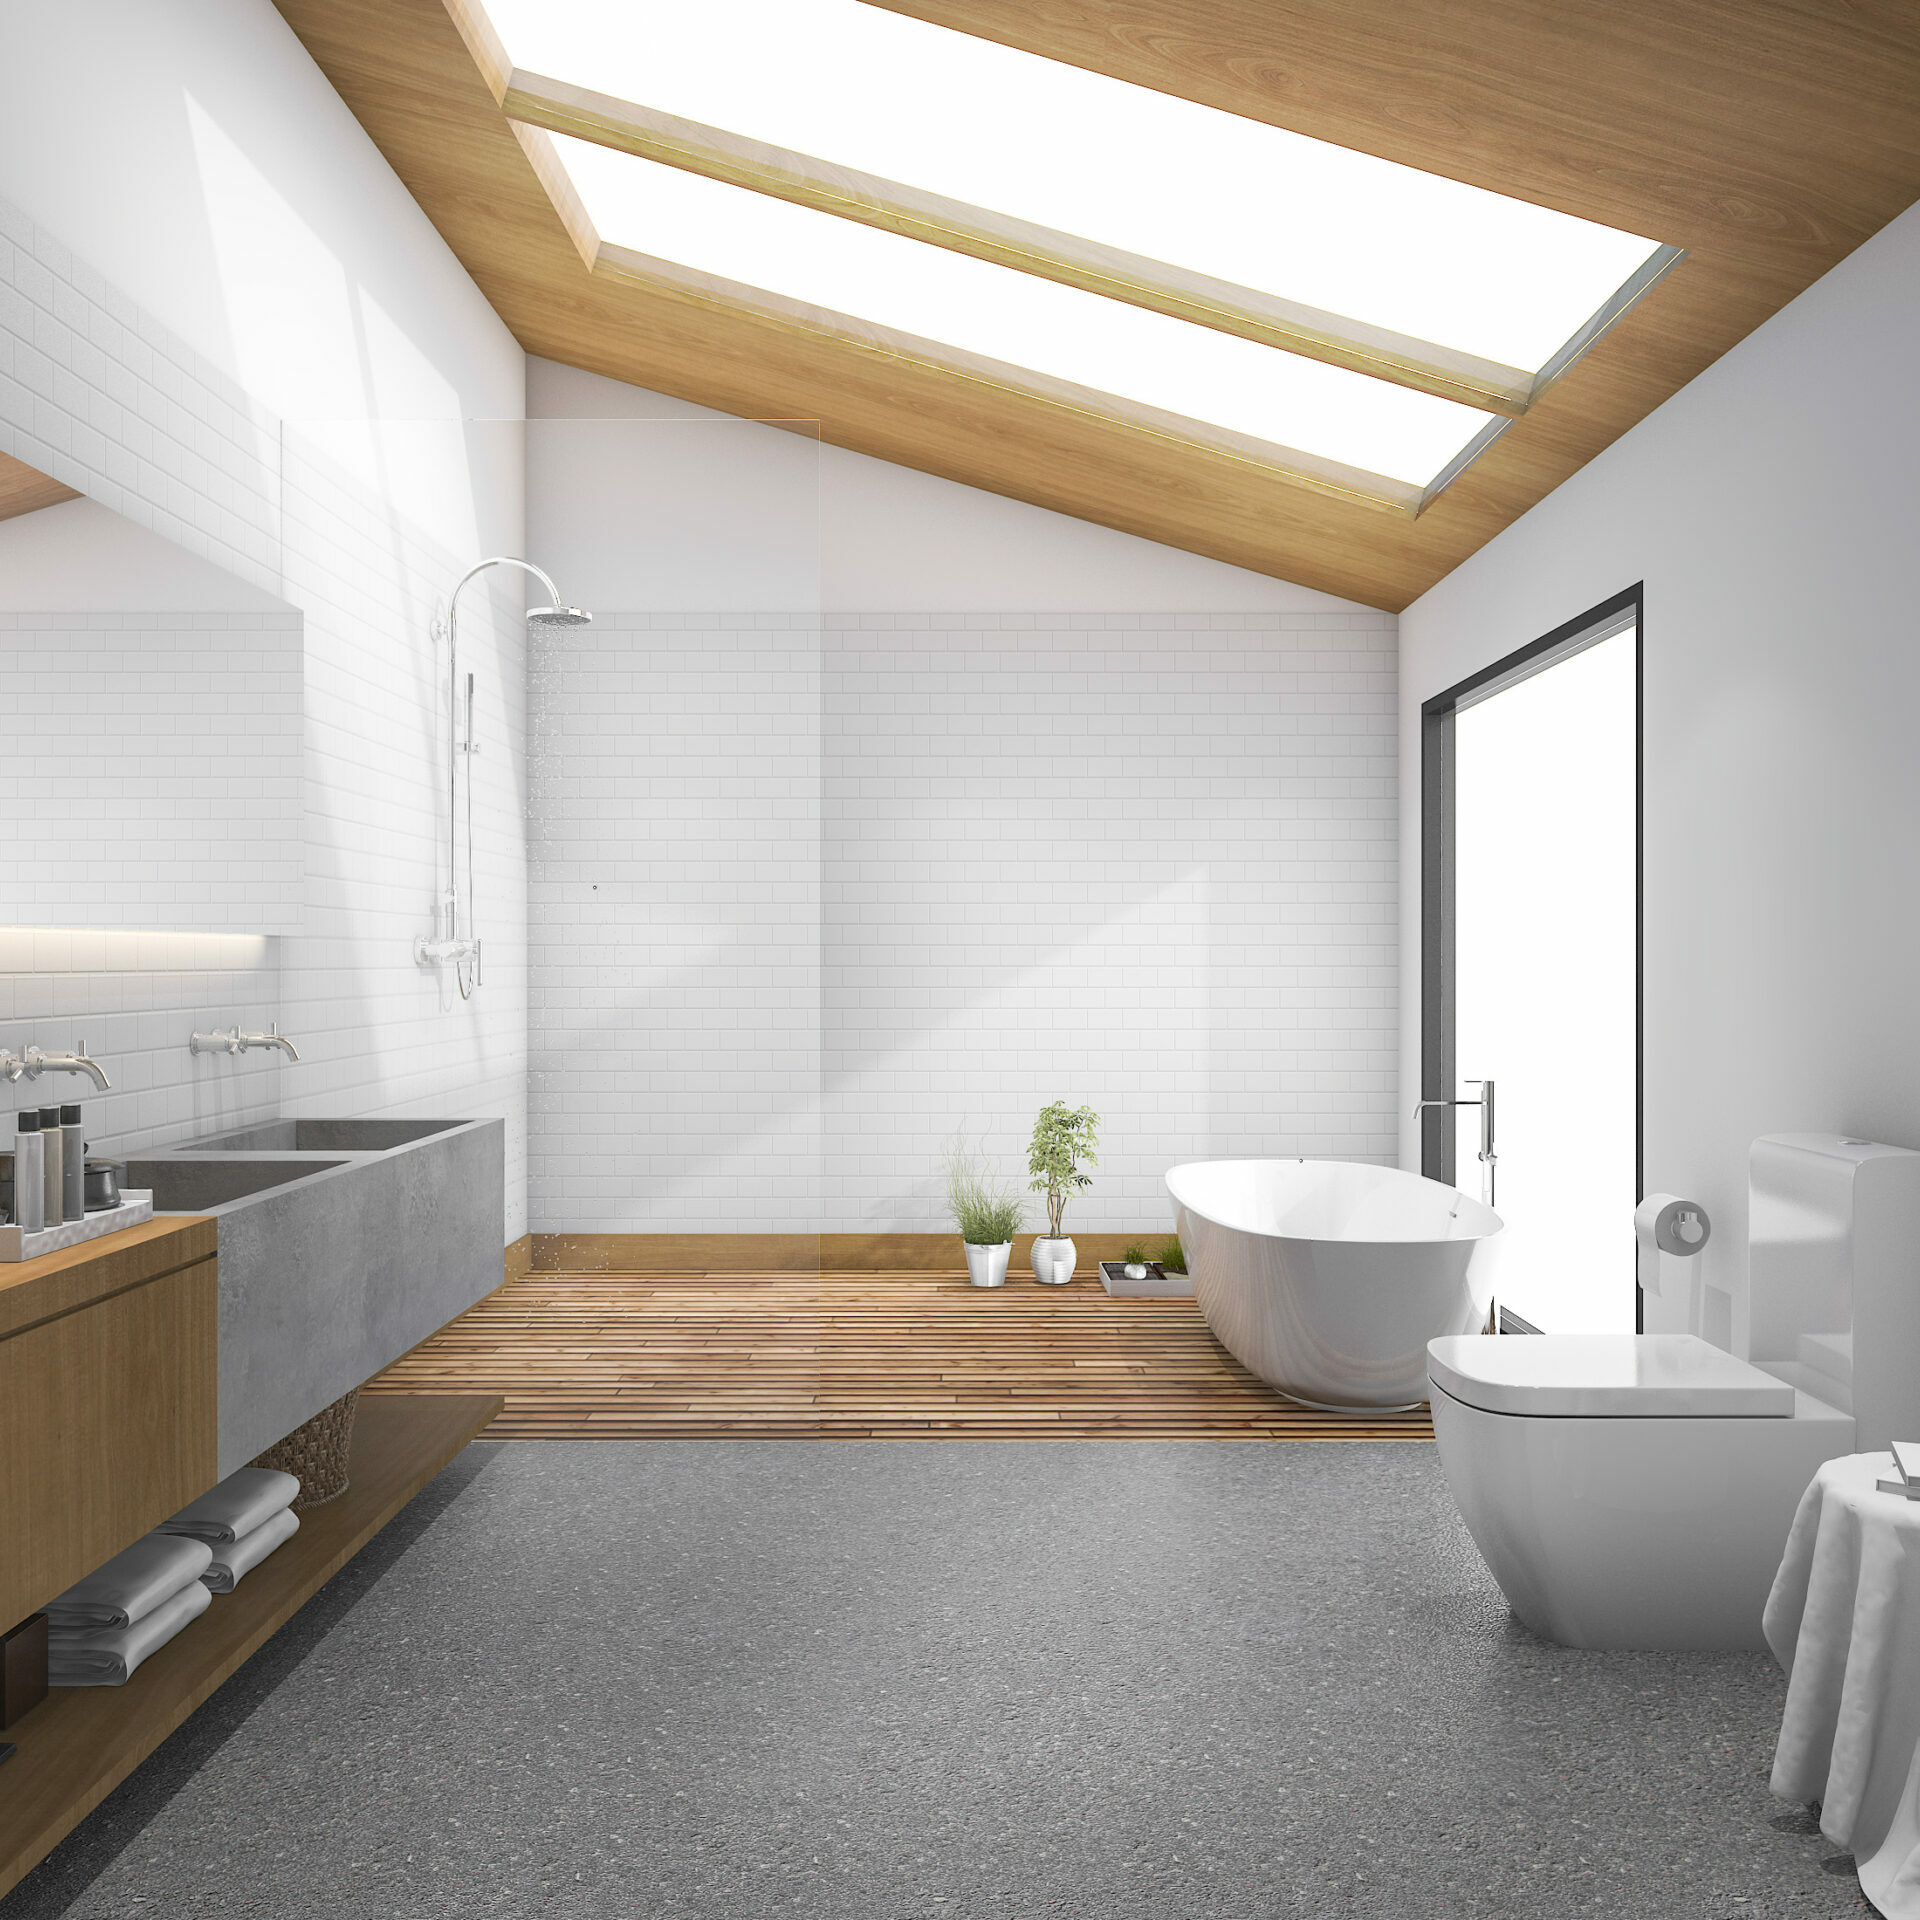 3d rendering skylight wood roof with modern design bathroom and toilet- strategy in your marketing activities